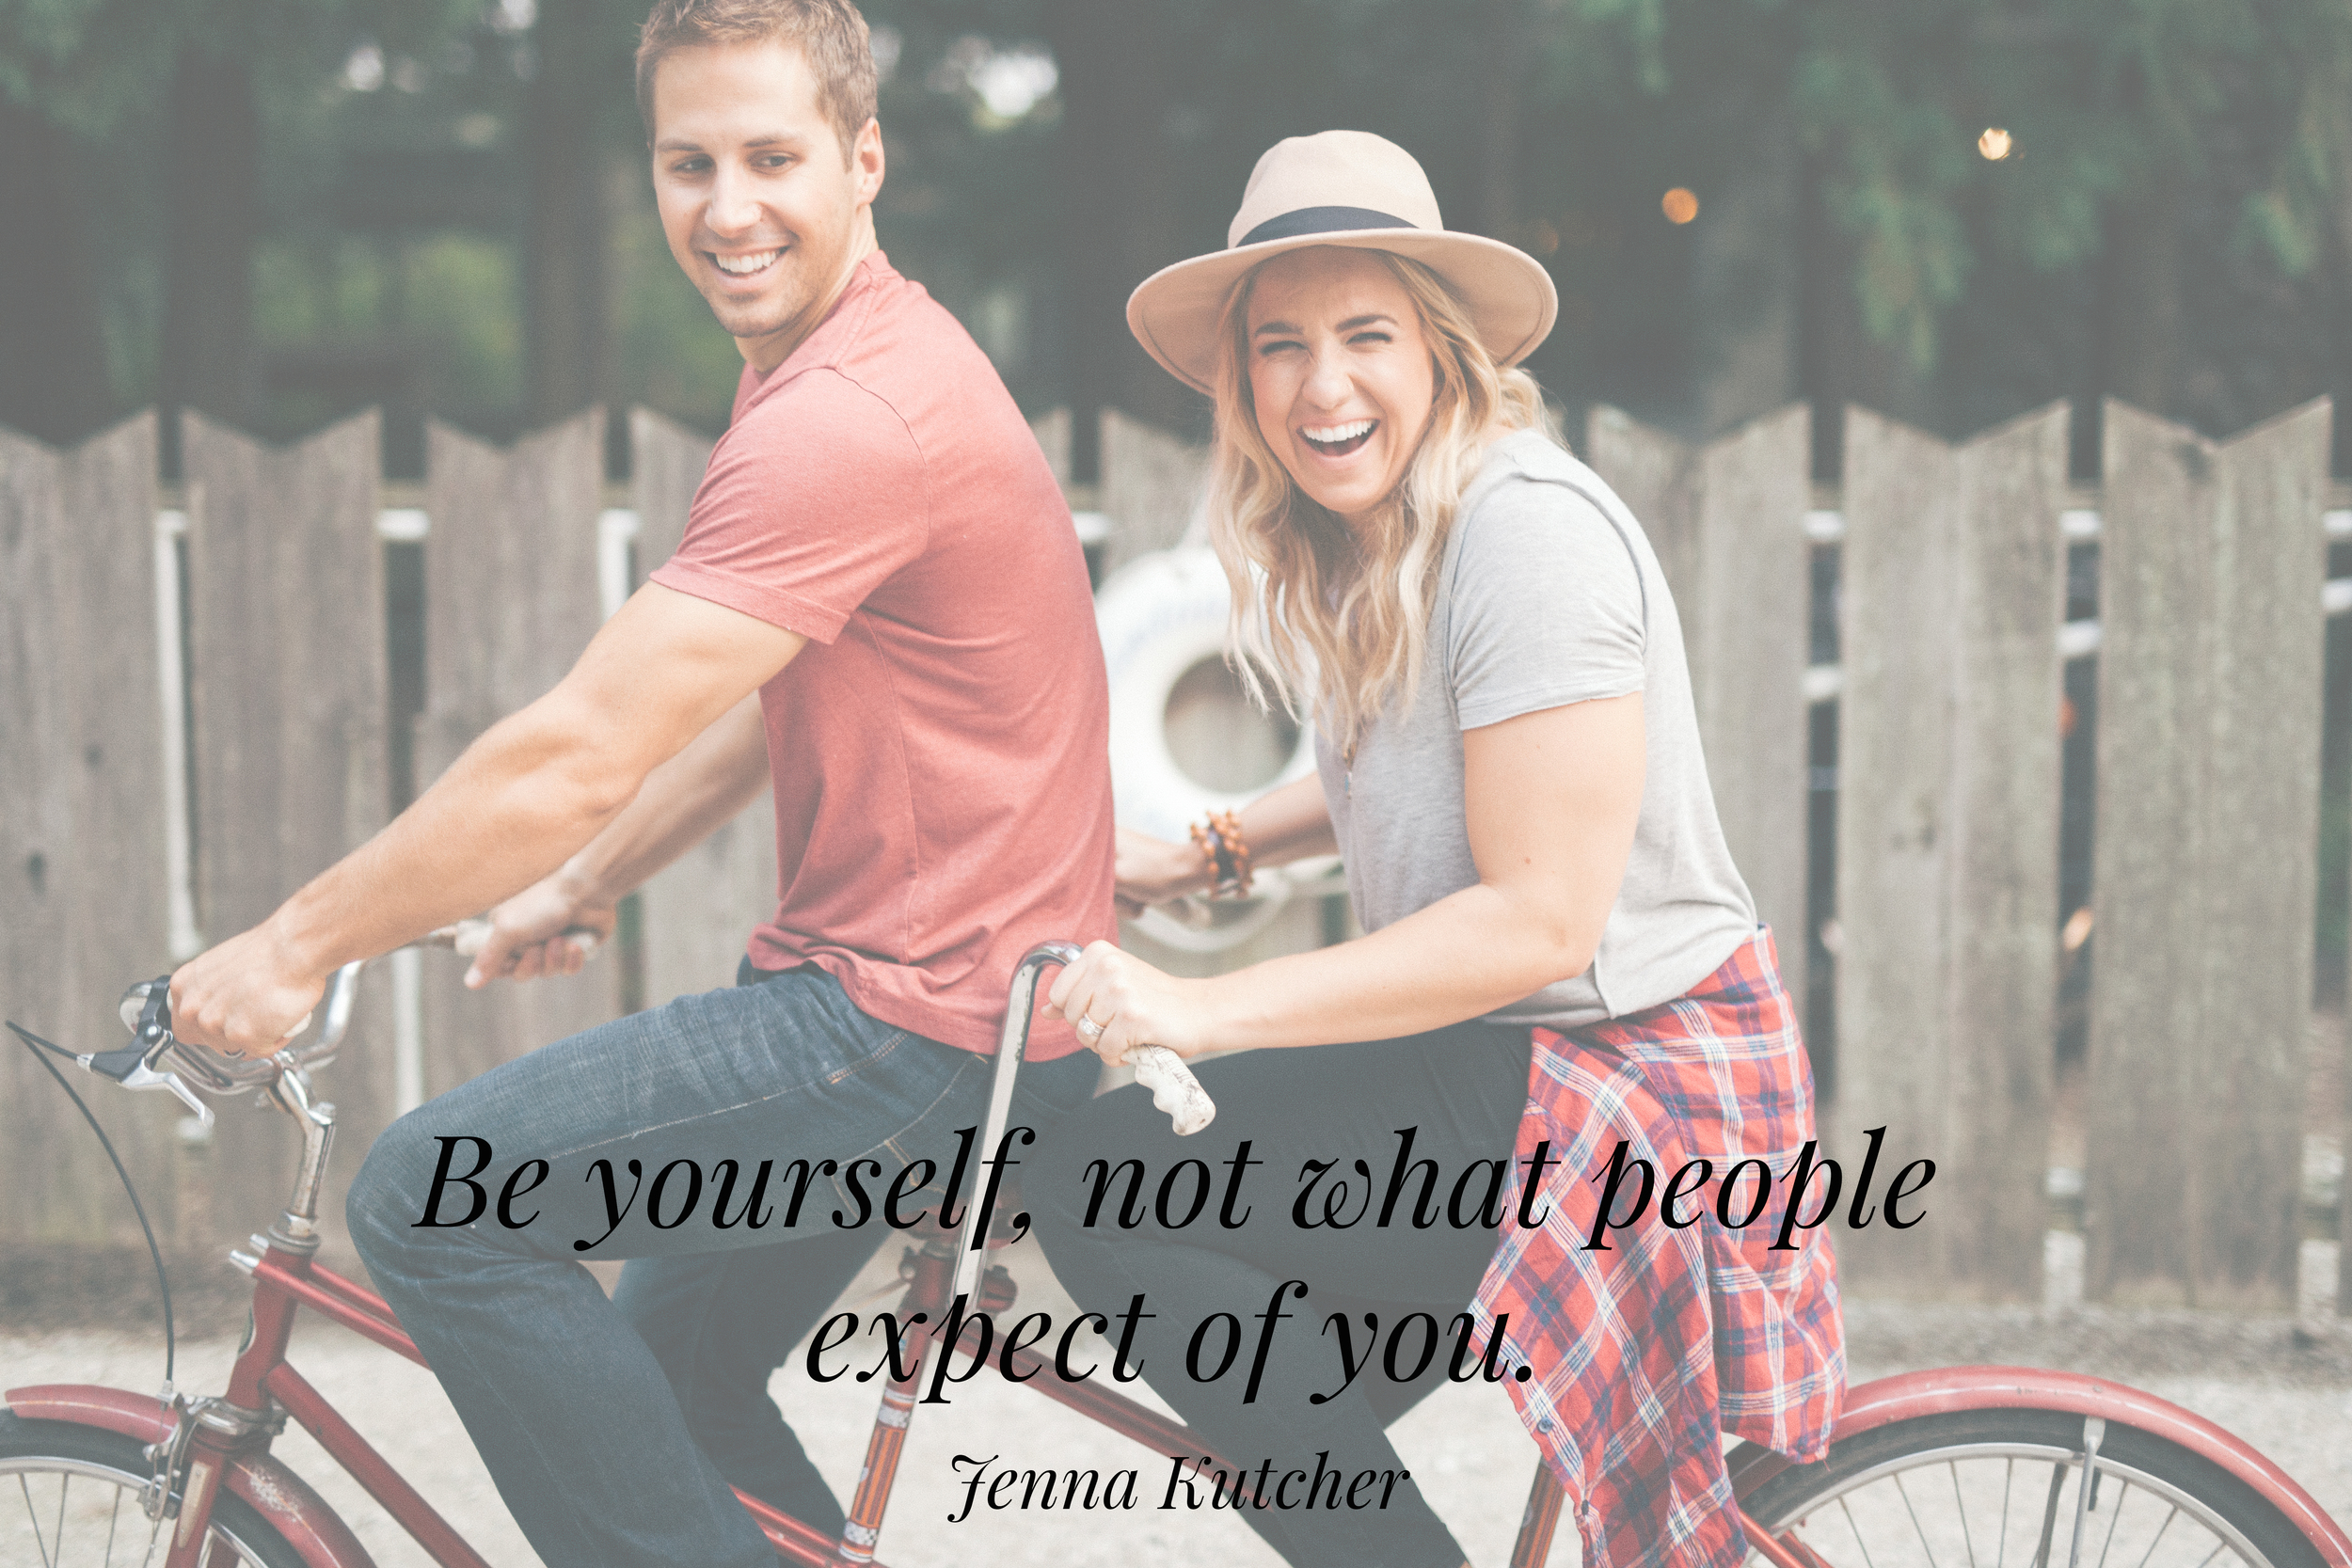   Jenna Kutcher  Interview | Advice for entrepreneurs | Wisconsin photographer | The School of Styling -  theschoolofstyling.com  